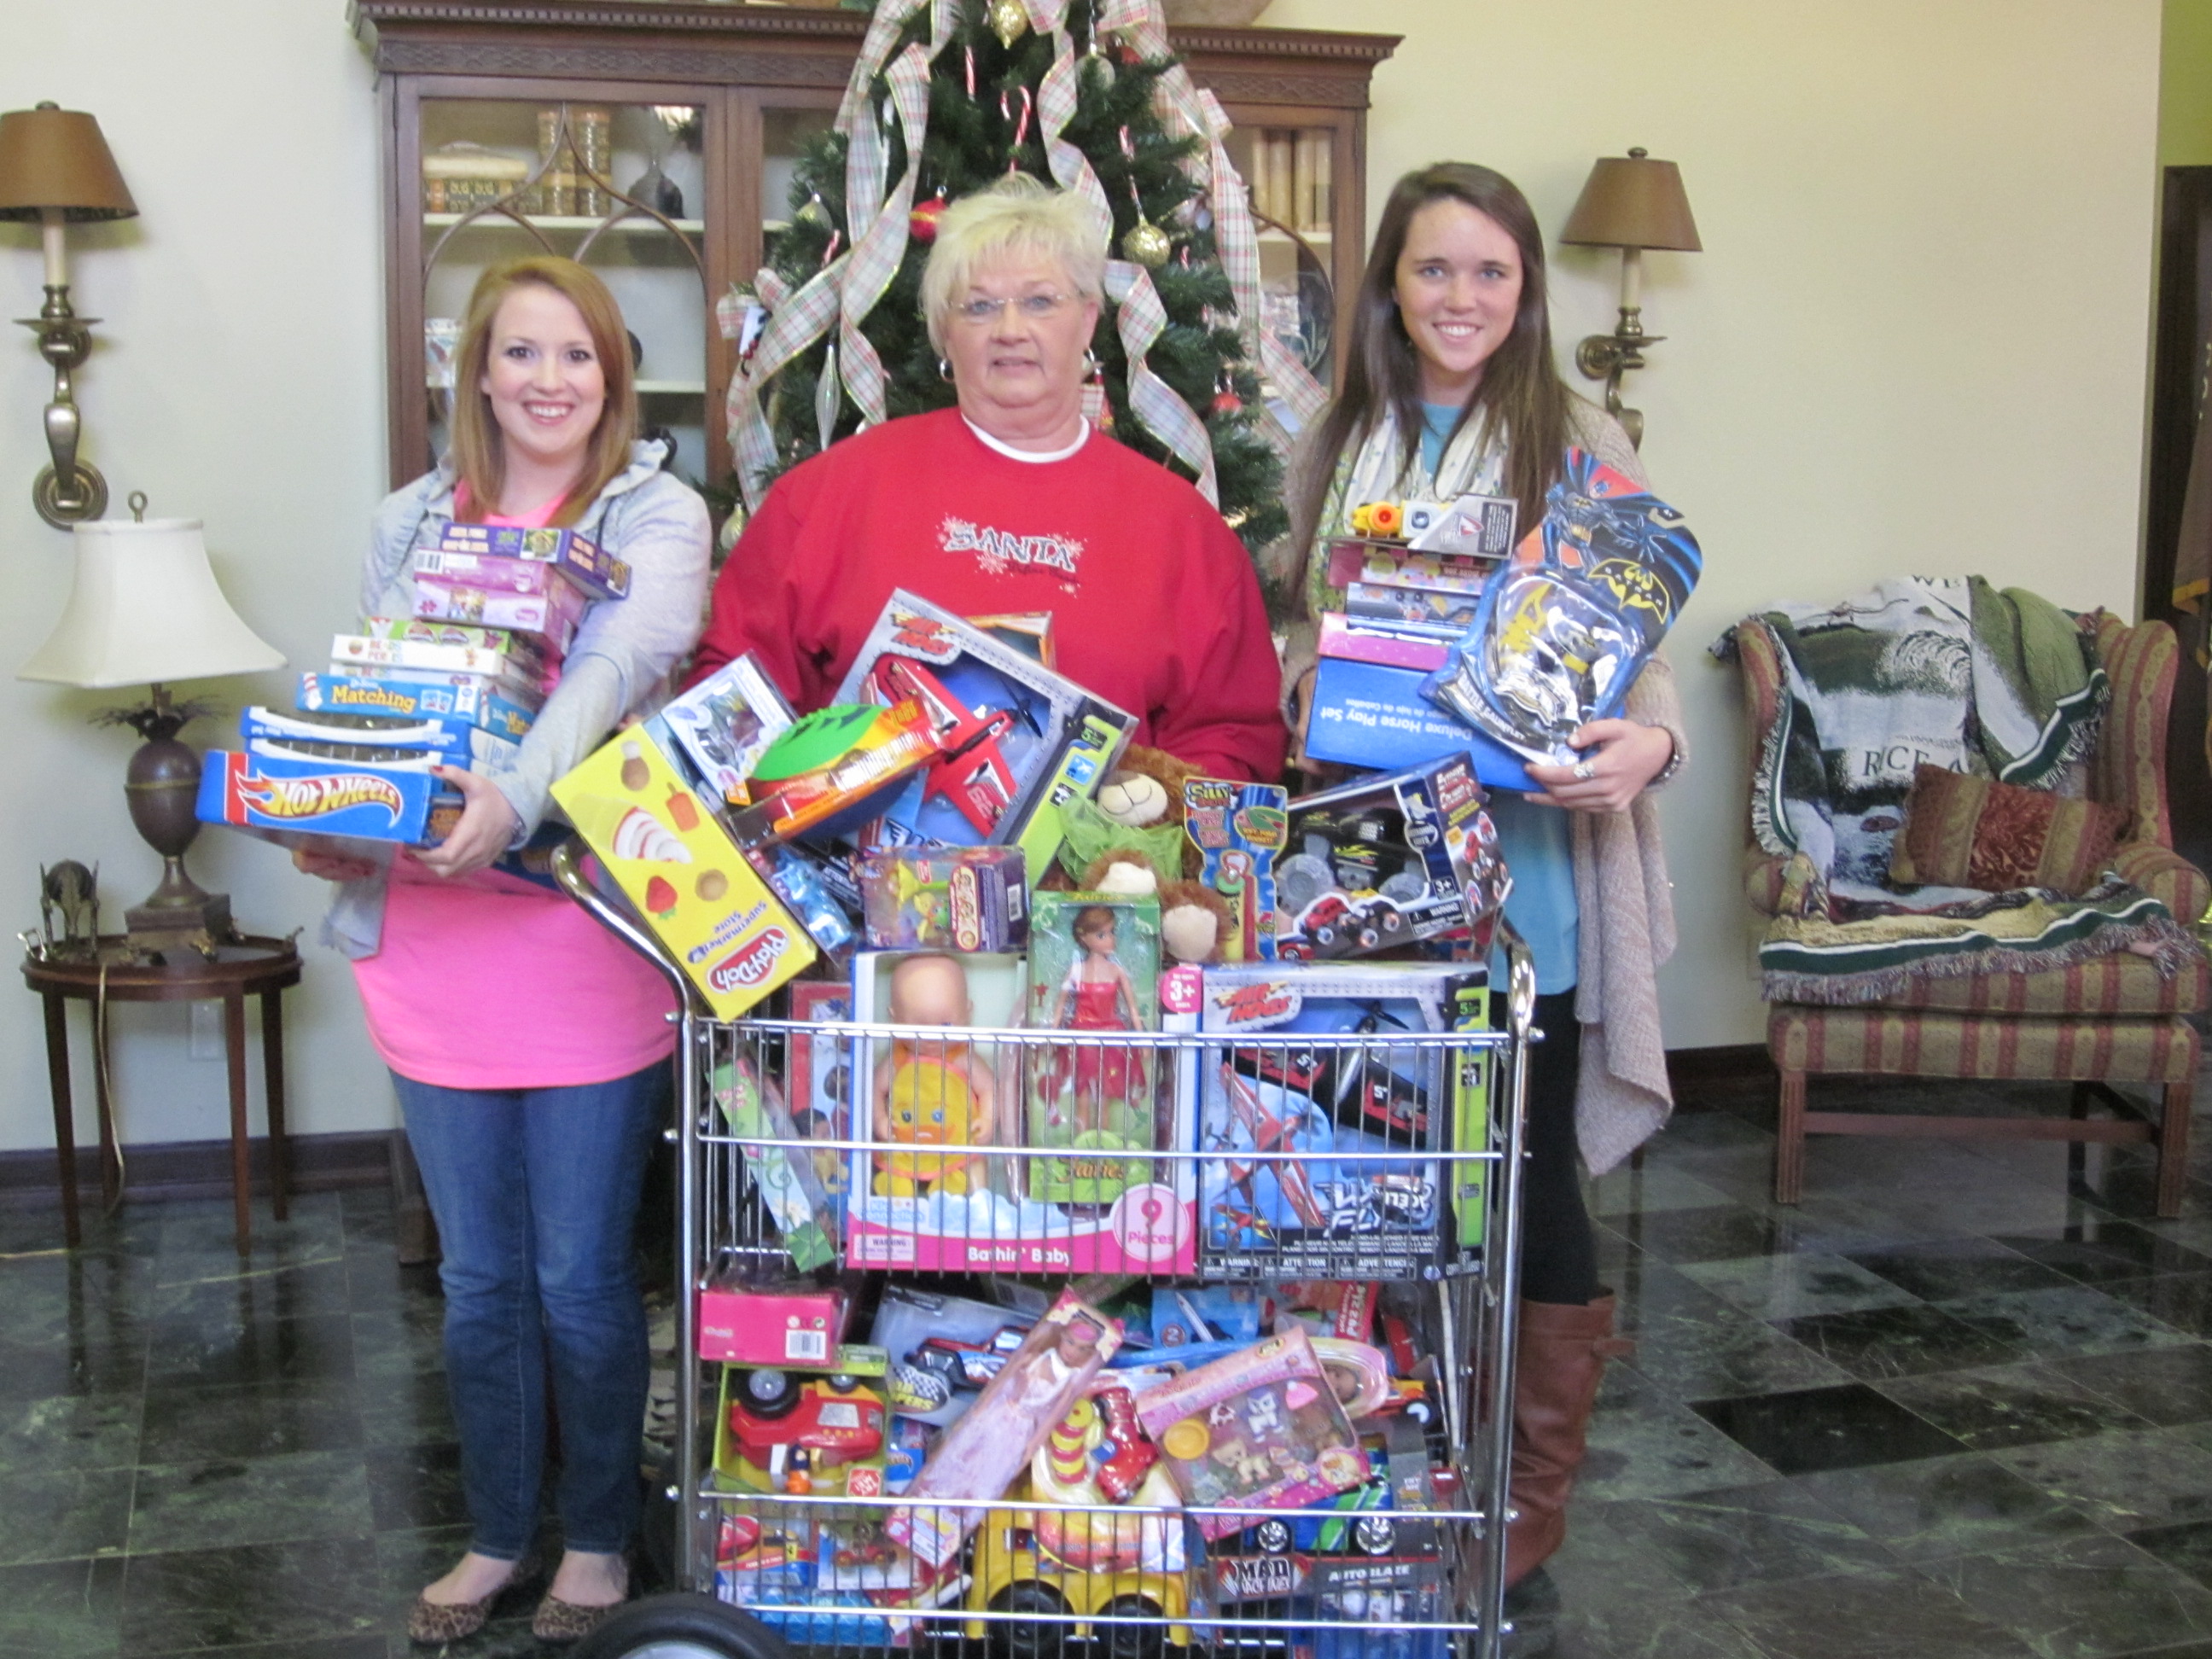 PHOTO:  From left, Amy Scott, Jo Donna Watson, and Shelby McIntire gather the gifts that were donated to the toy drive.